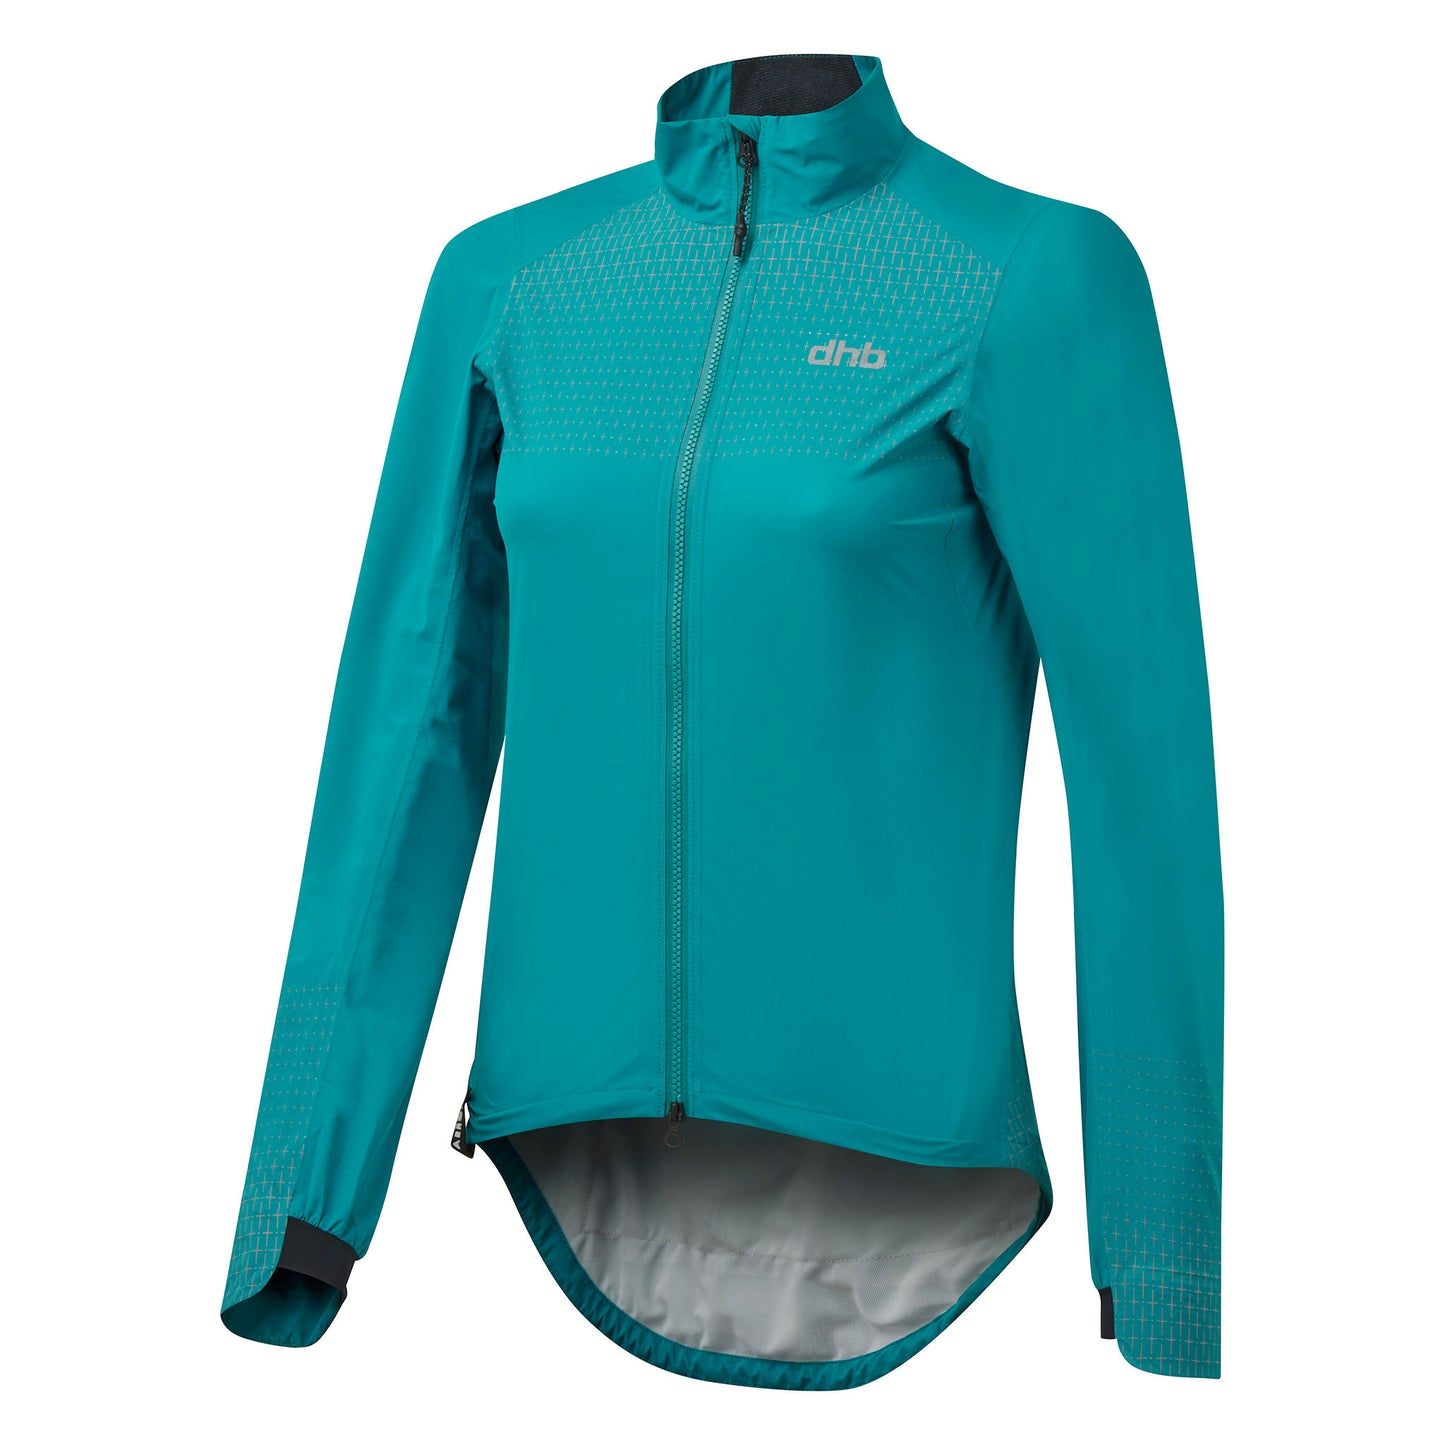 DHB Women's Aeron Tempo FLT Waterproof Jacket buy online at Woolys Wheels Sydney with free delivery